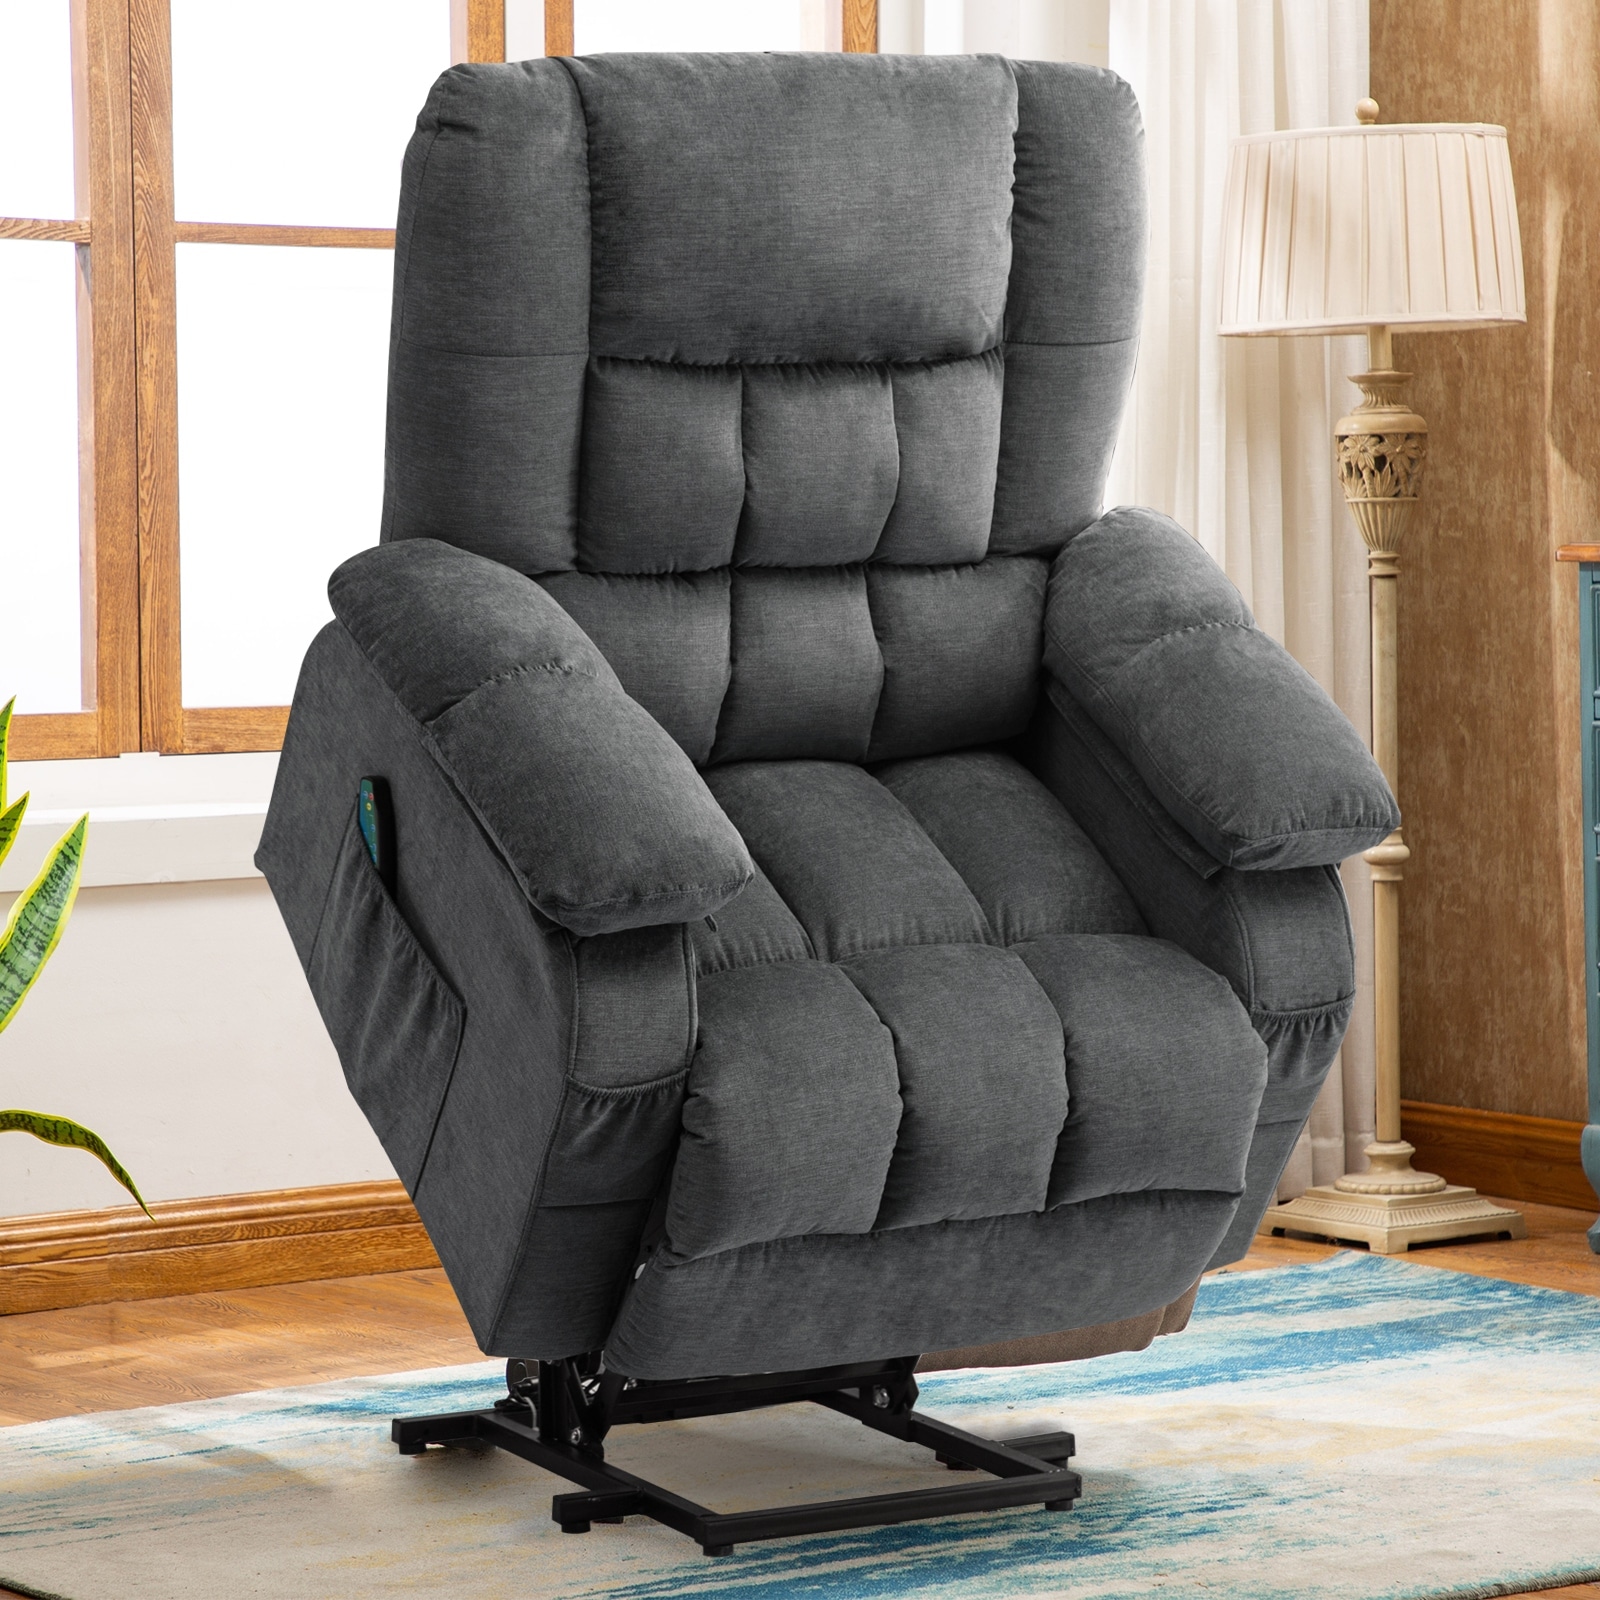 https://ak1.ostkcdn.com/images/products/is/images/direct/6bbbb9fdc6ea39d18565c8ef56f1e99aad2b0a4c/Super-Soft-And-Large-Power-Lift-Recliner-Chair-with-Massage-and-Heat-for-Elserly.jpg